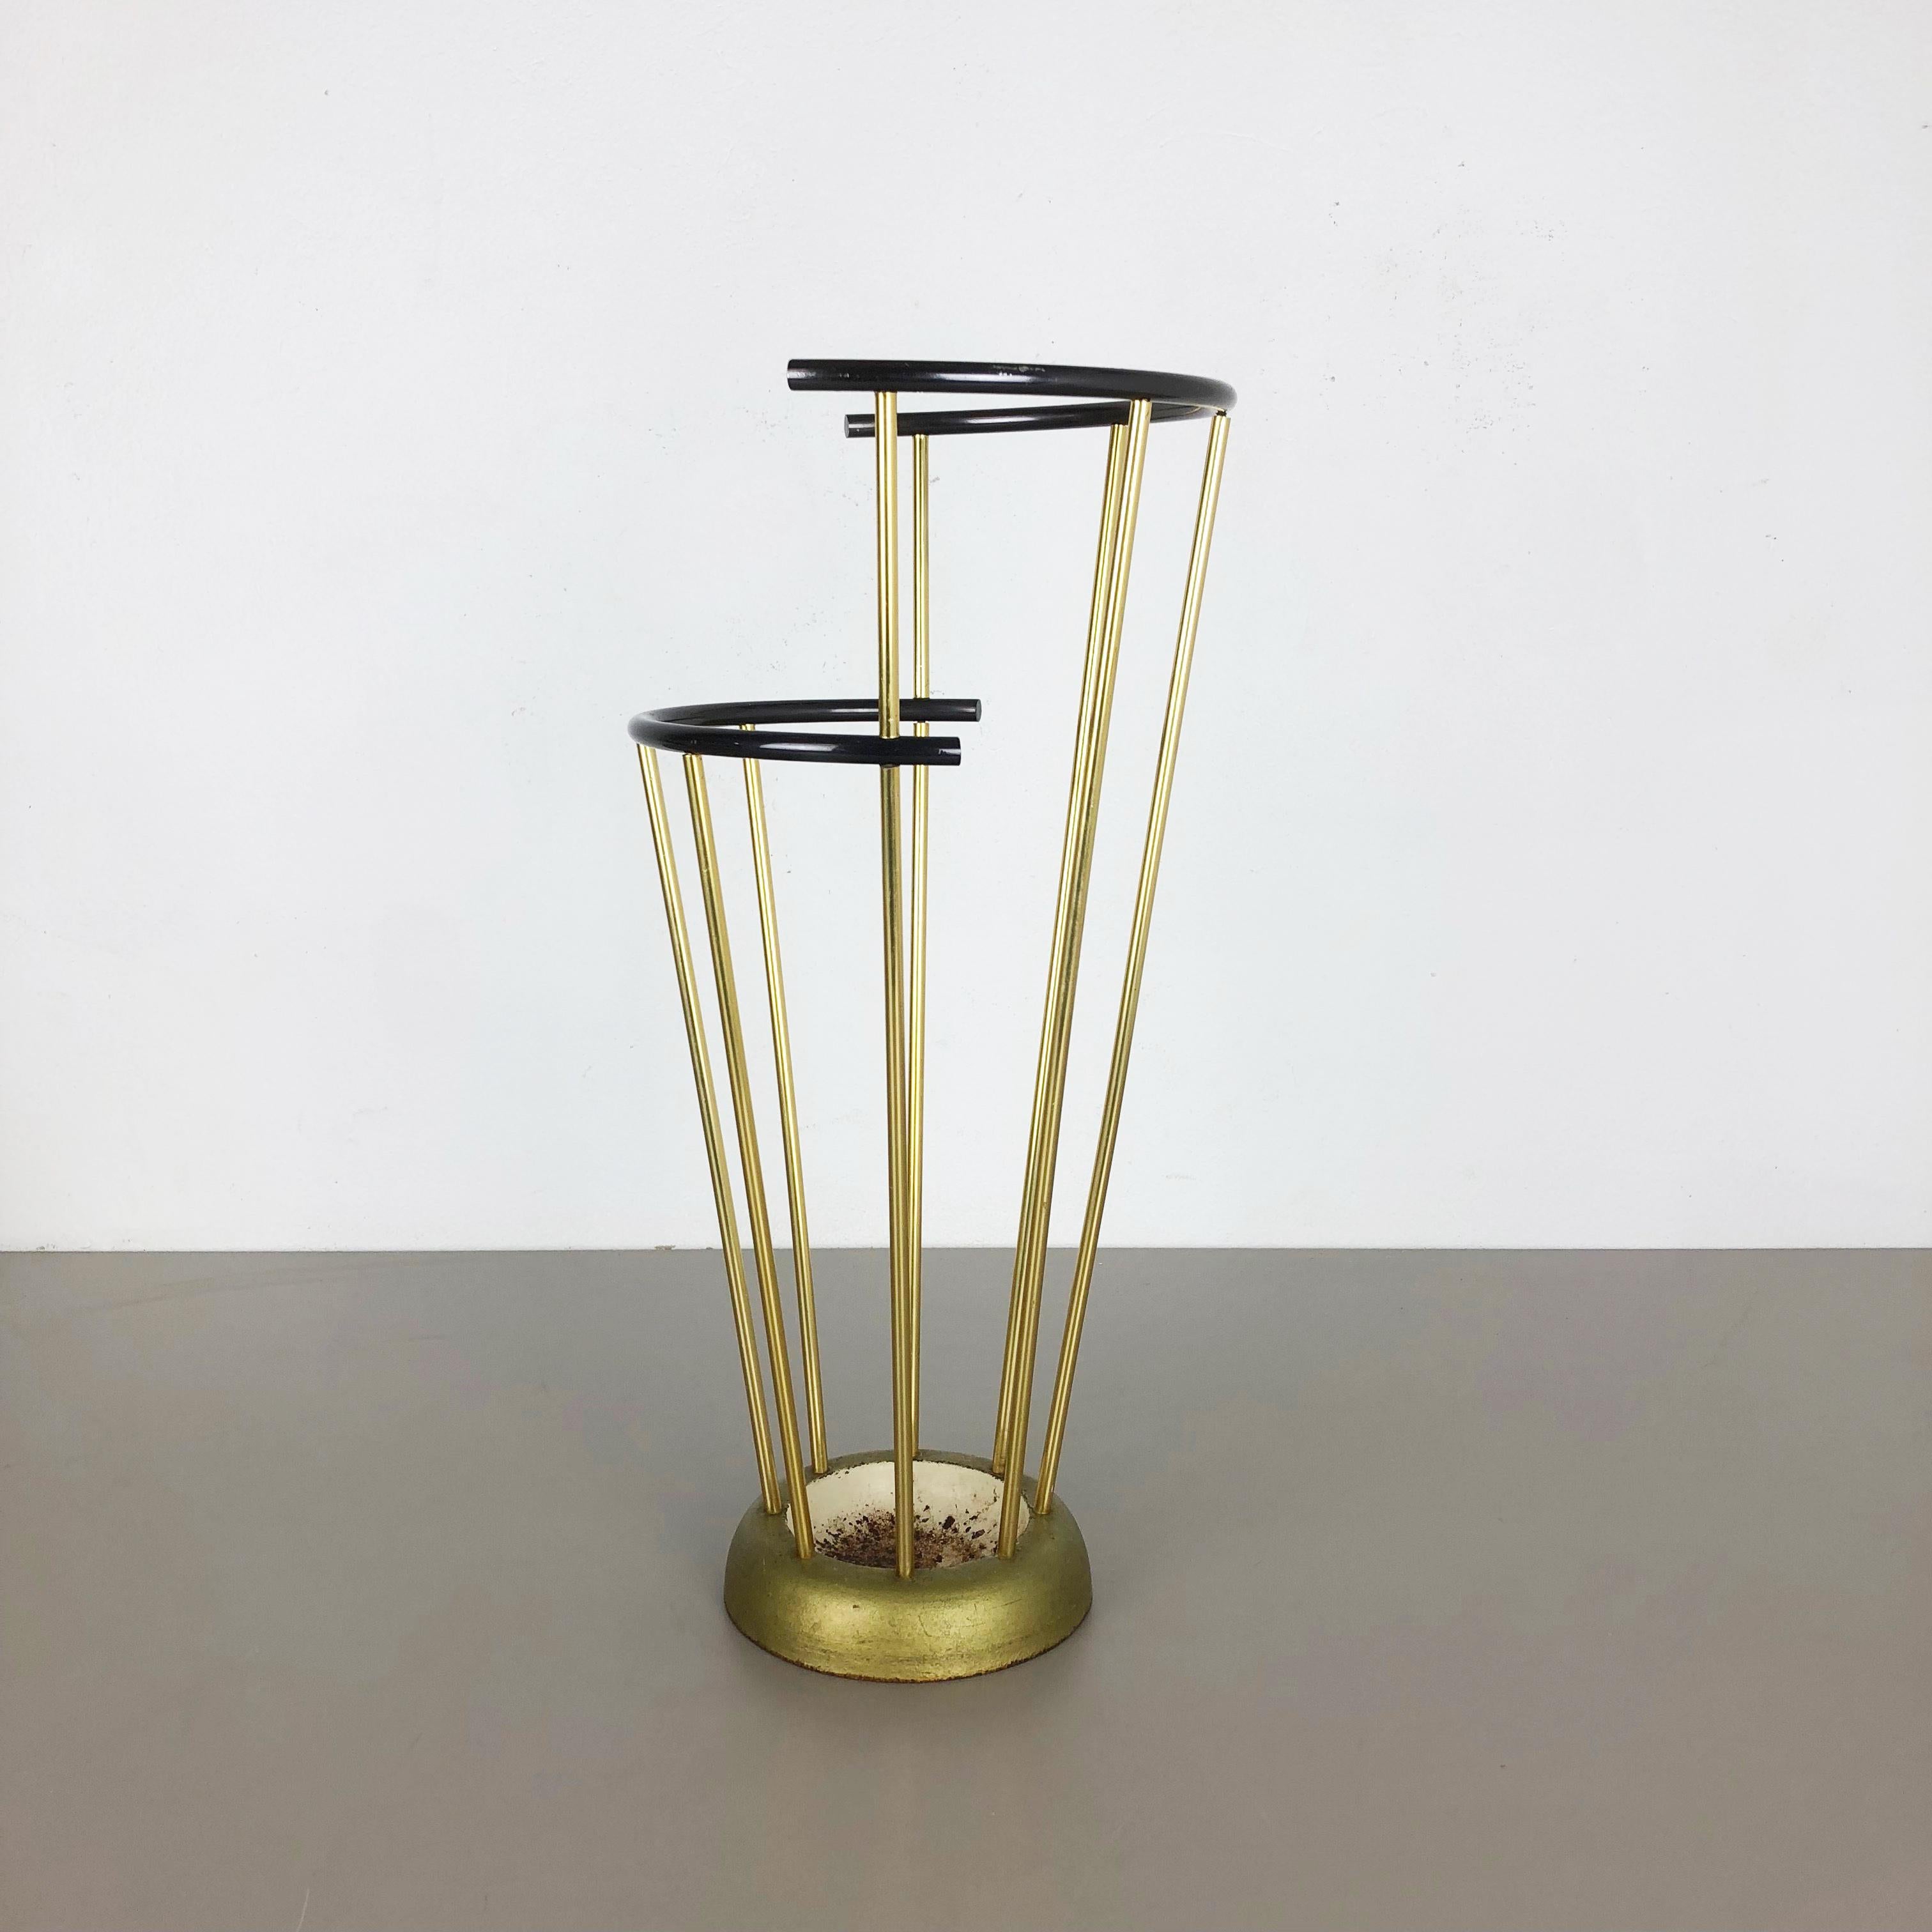 Article:

Bauhaus umbrella stand


Origin:

Germany


Producer:

Geco Metall, Germany


Age:

1950s


This original vintage Bauhaus style umbrella Stand was produced in the 1950s in Germany by Geco Metall. the brass colored top elements are made of